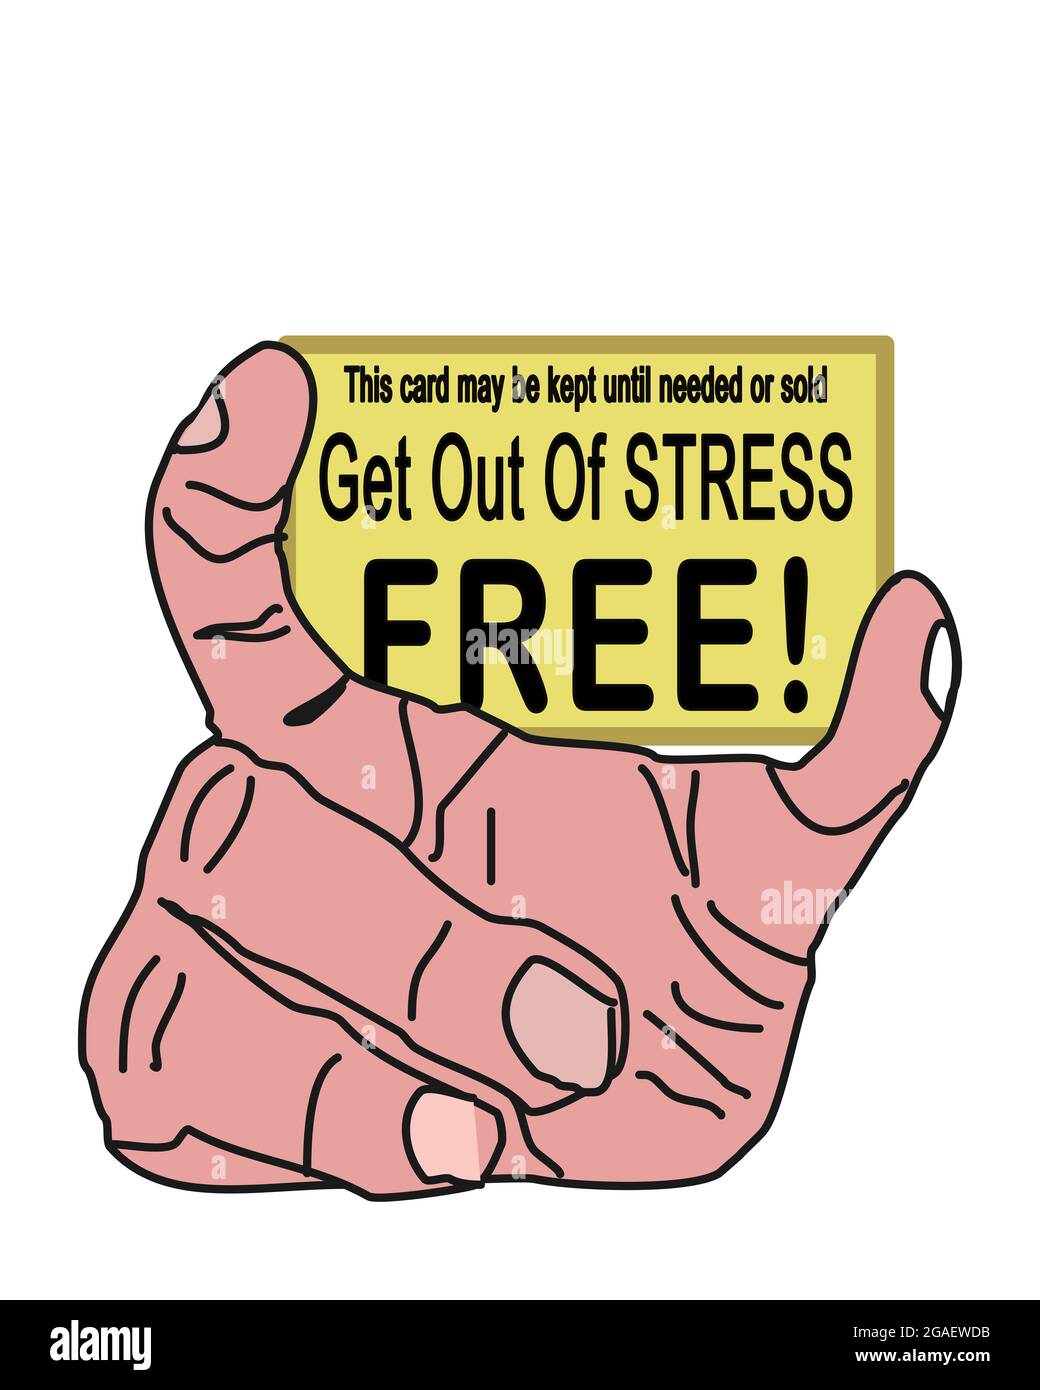 Illustration Shows Concept of Being Stress Free - Man's hand holding get of of stress free. Stock Photo